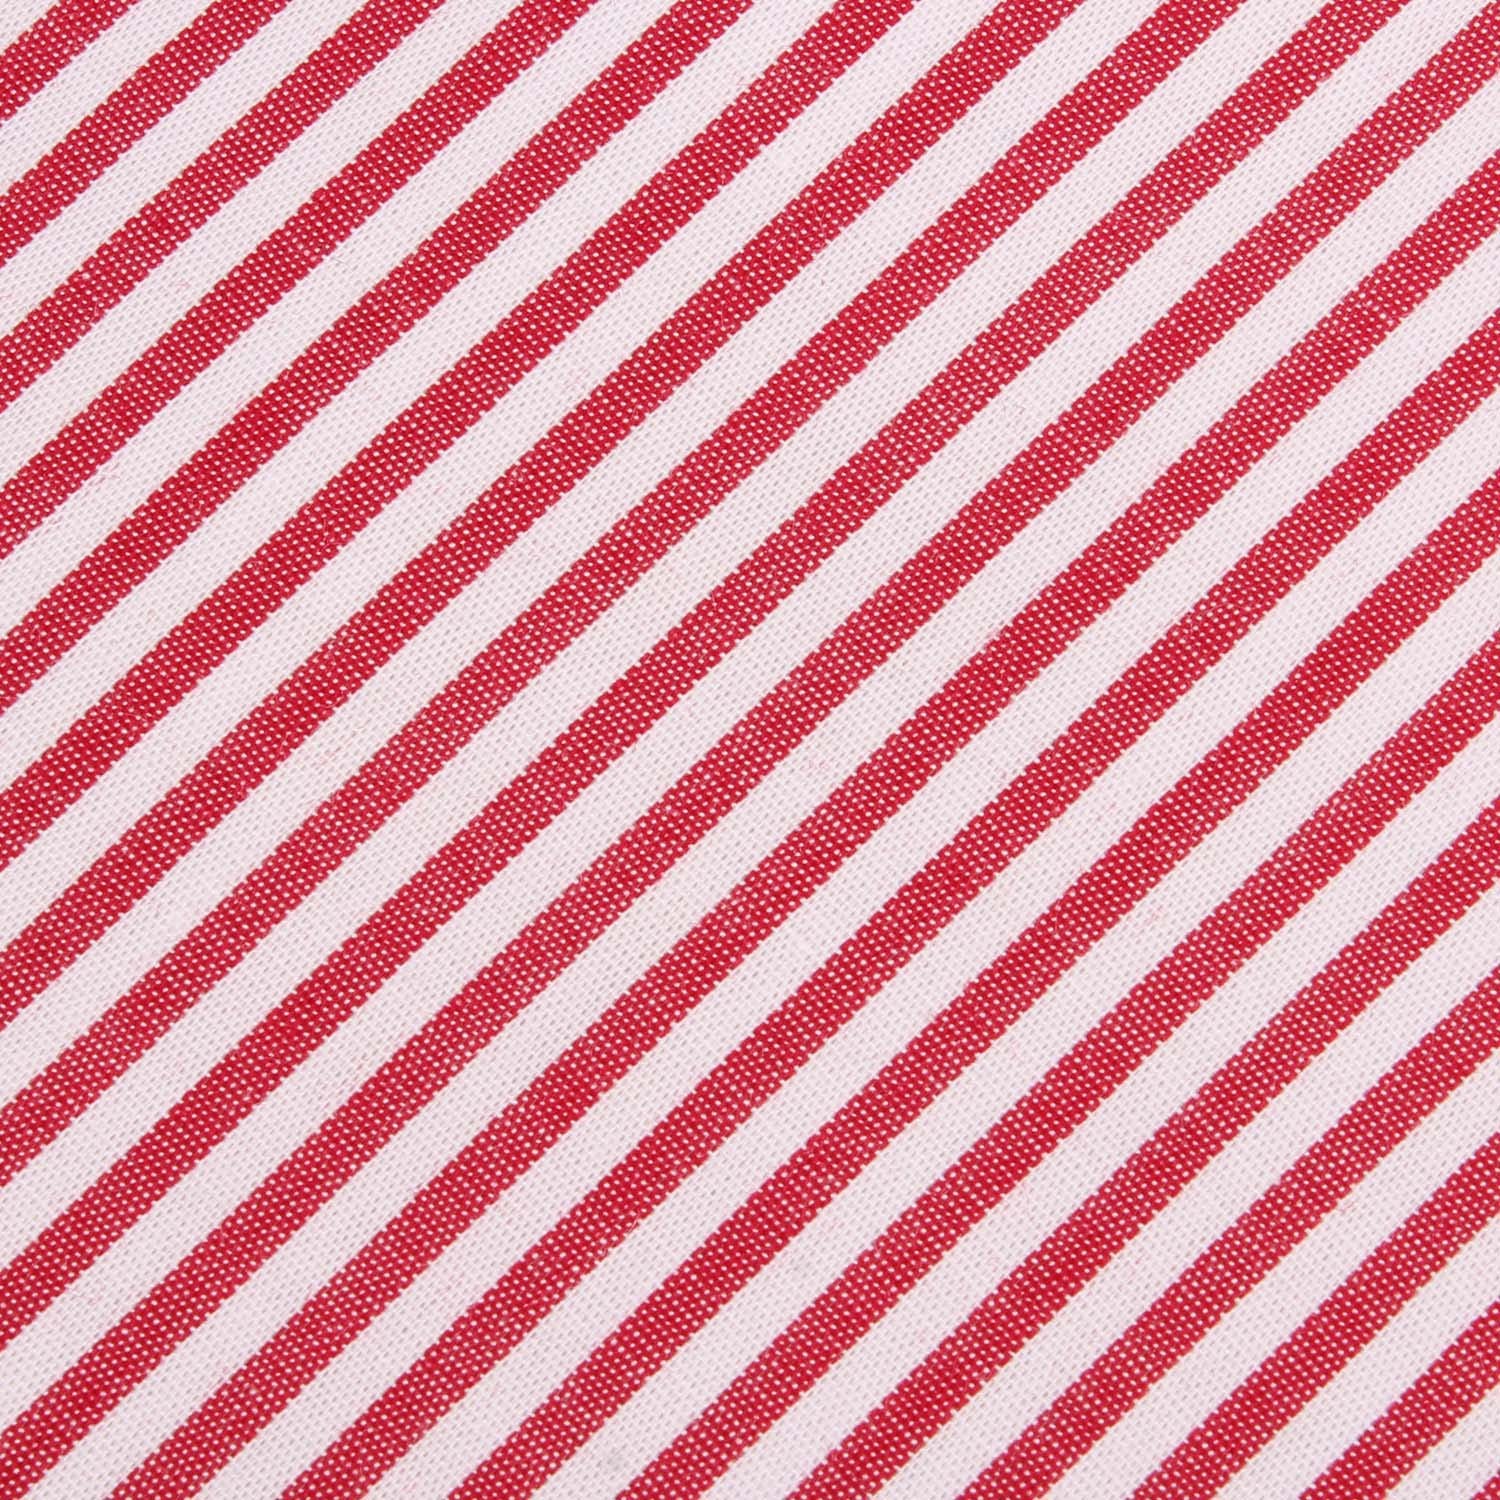 Red and White Chalk Stripe Cotton Fabric Pocket Square C005